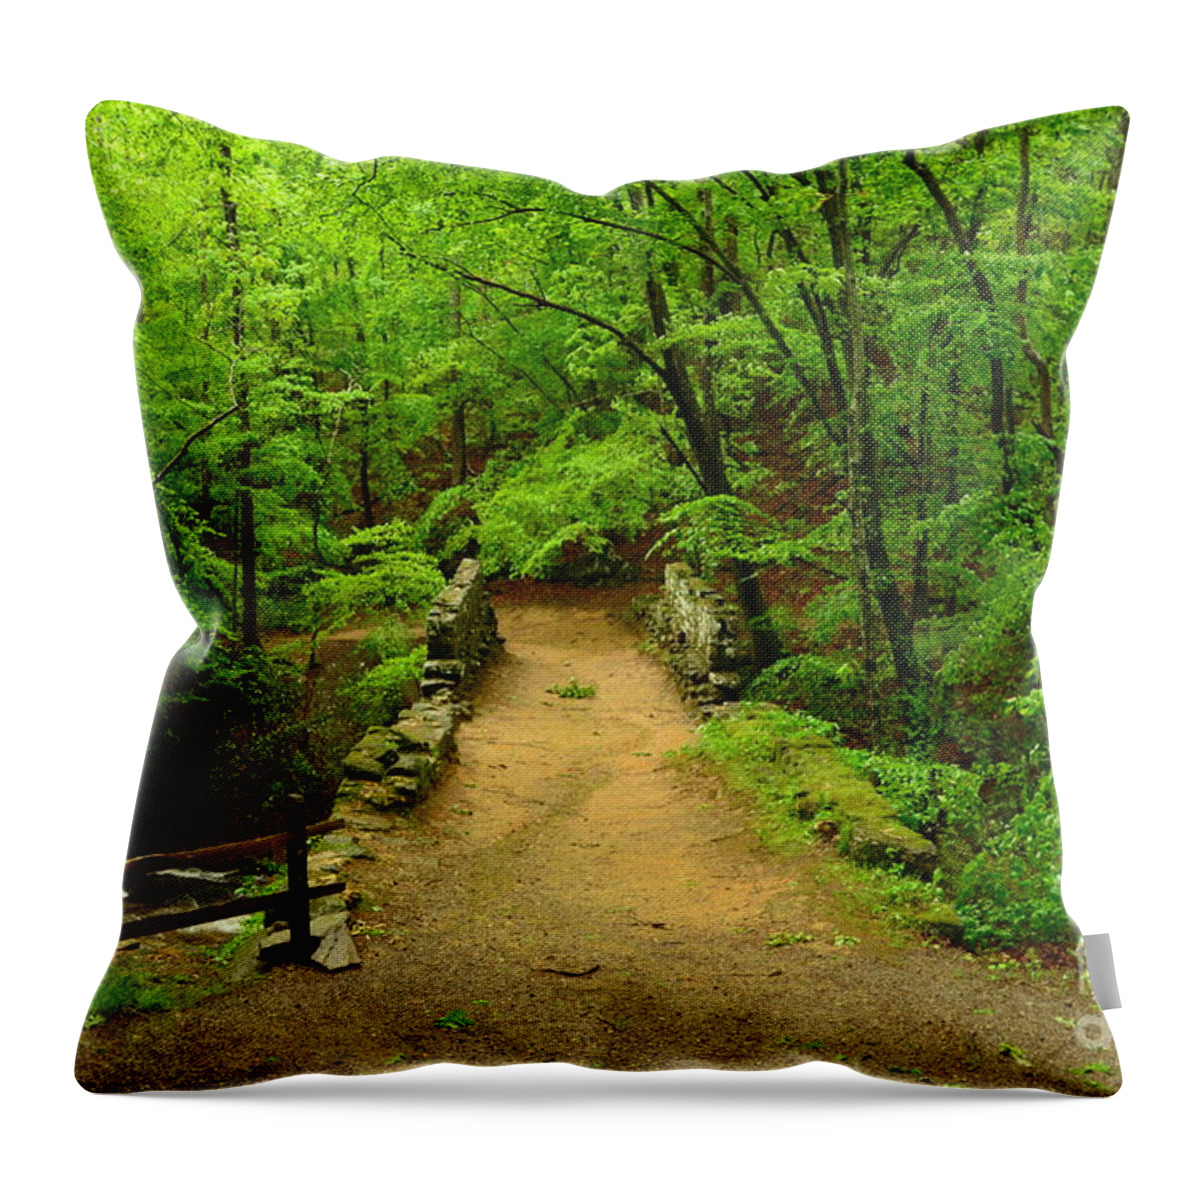 Green Throw Pillow featuring the photograph Century Old Stone Bridge by Bob Sample